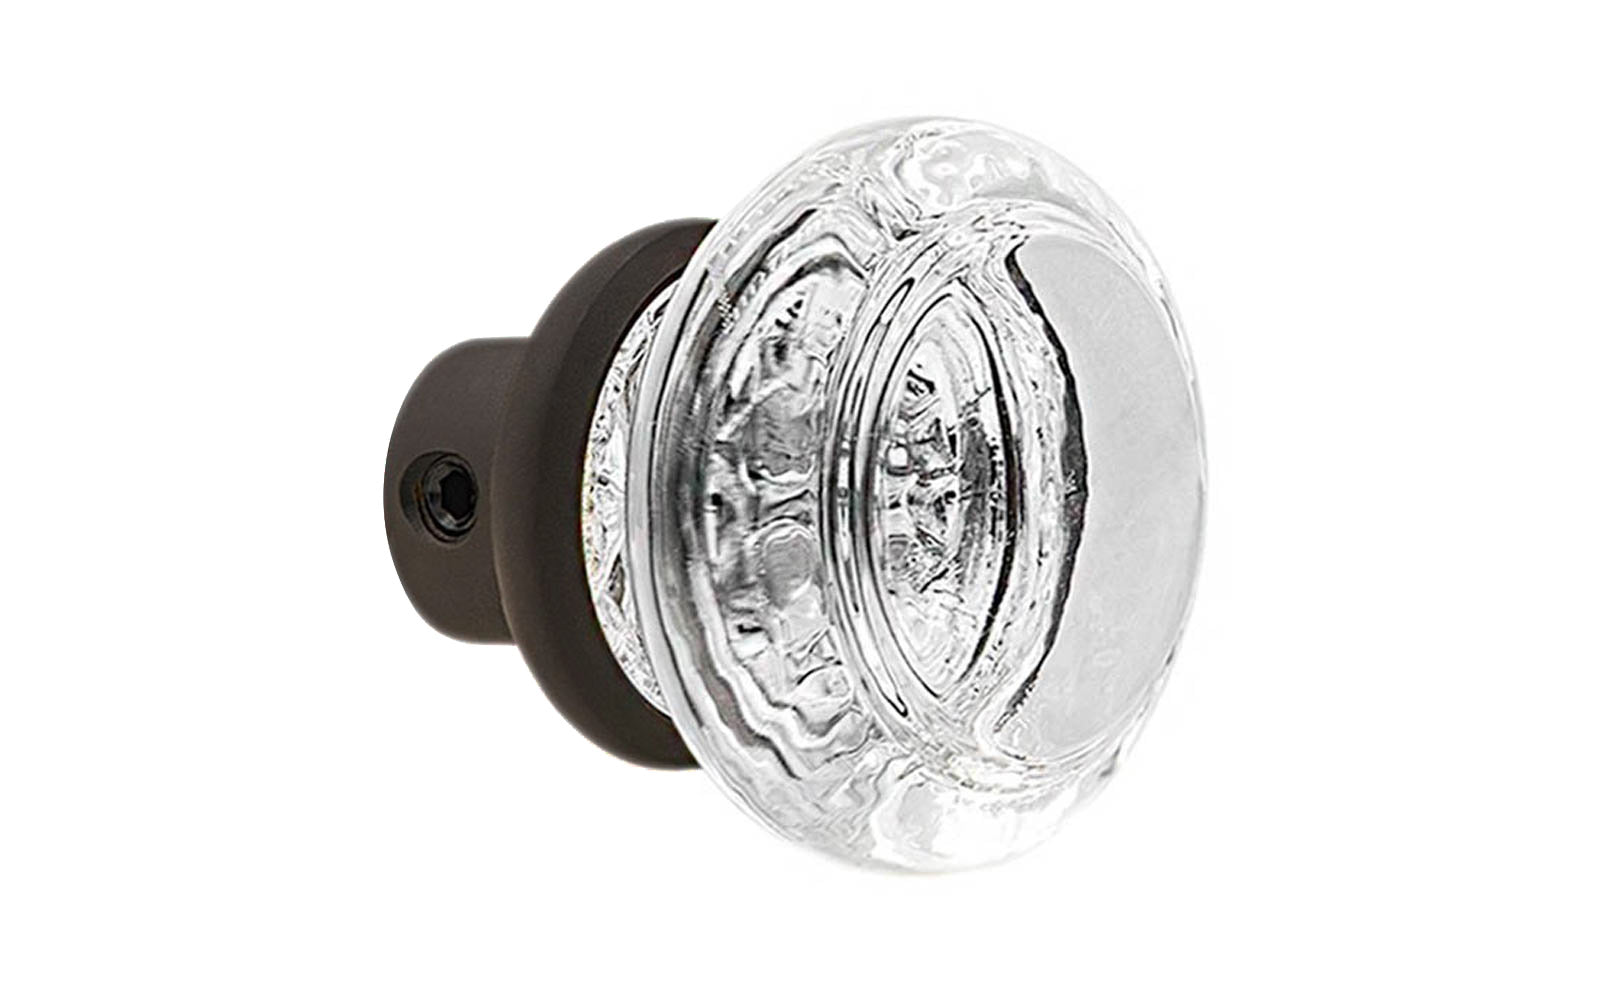 Single Classic Round Clear Glass Doorknob. A high quality & genuine glass doorknob with an attractive round design. The sparkling center point under glass amplifies reflected light to showcase beautiful facets. Solid brass base. Reproduction Glass Door Knobs. Traditional Round Glass Knobs. One knob. Oil Rubbed Bronze Finish.